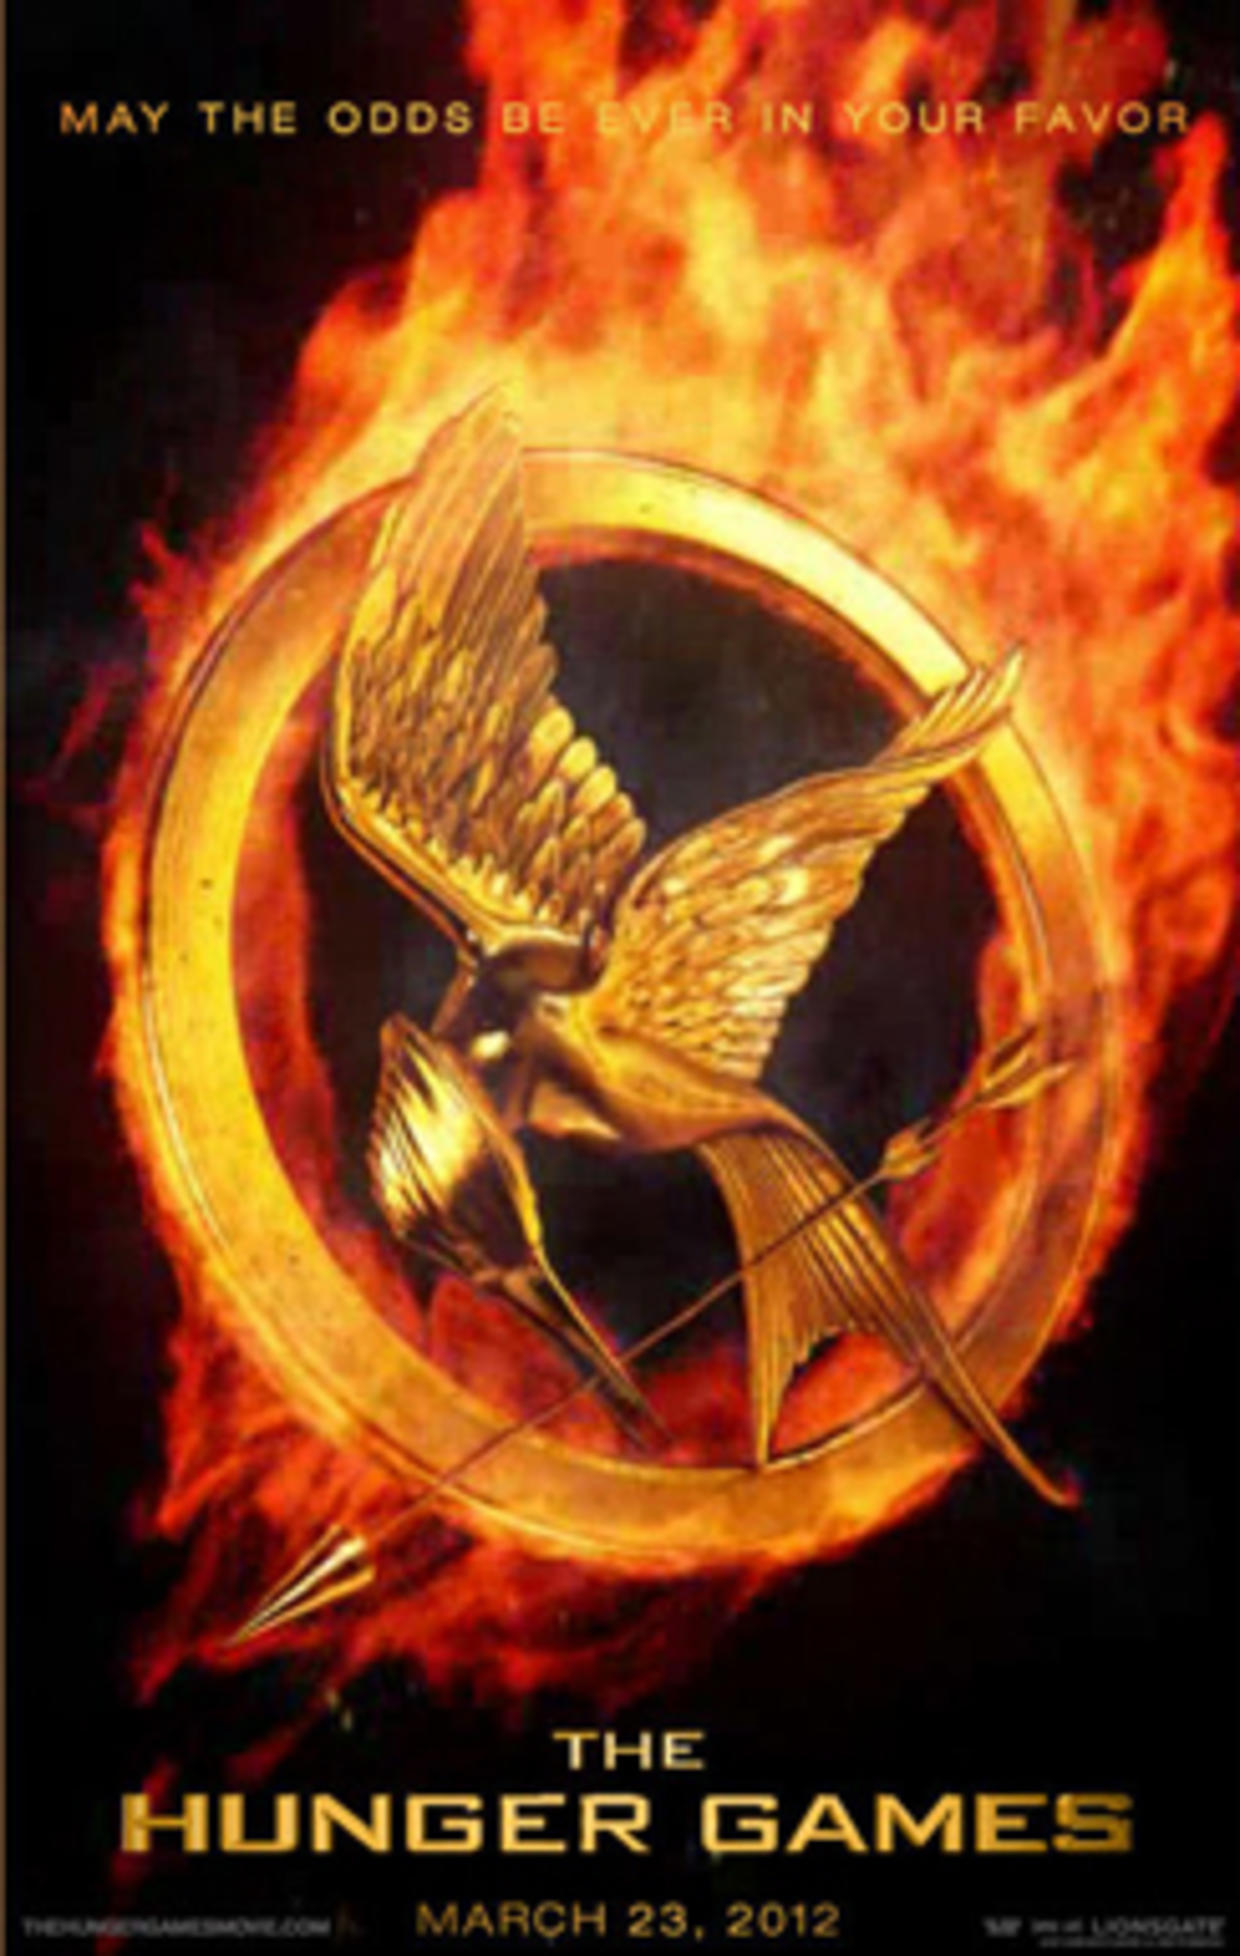 "The Hunger Games" releases fiery new poster CBS News